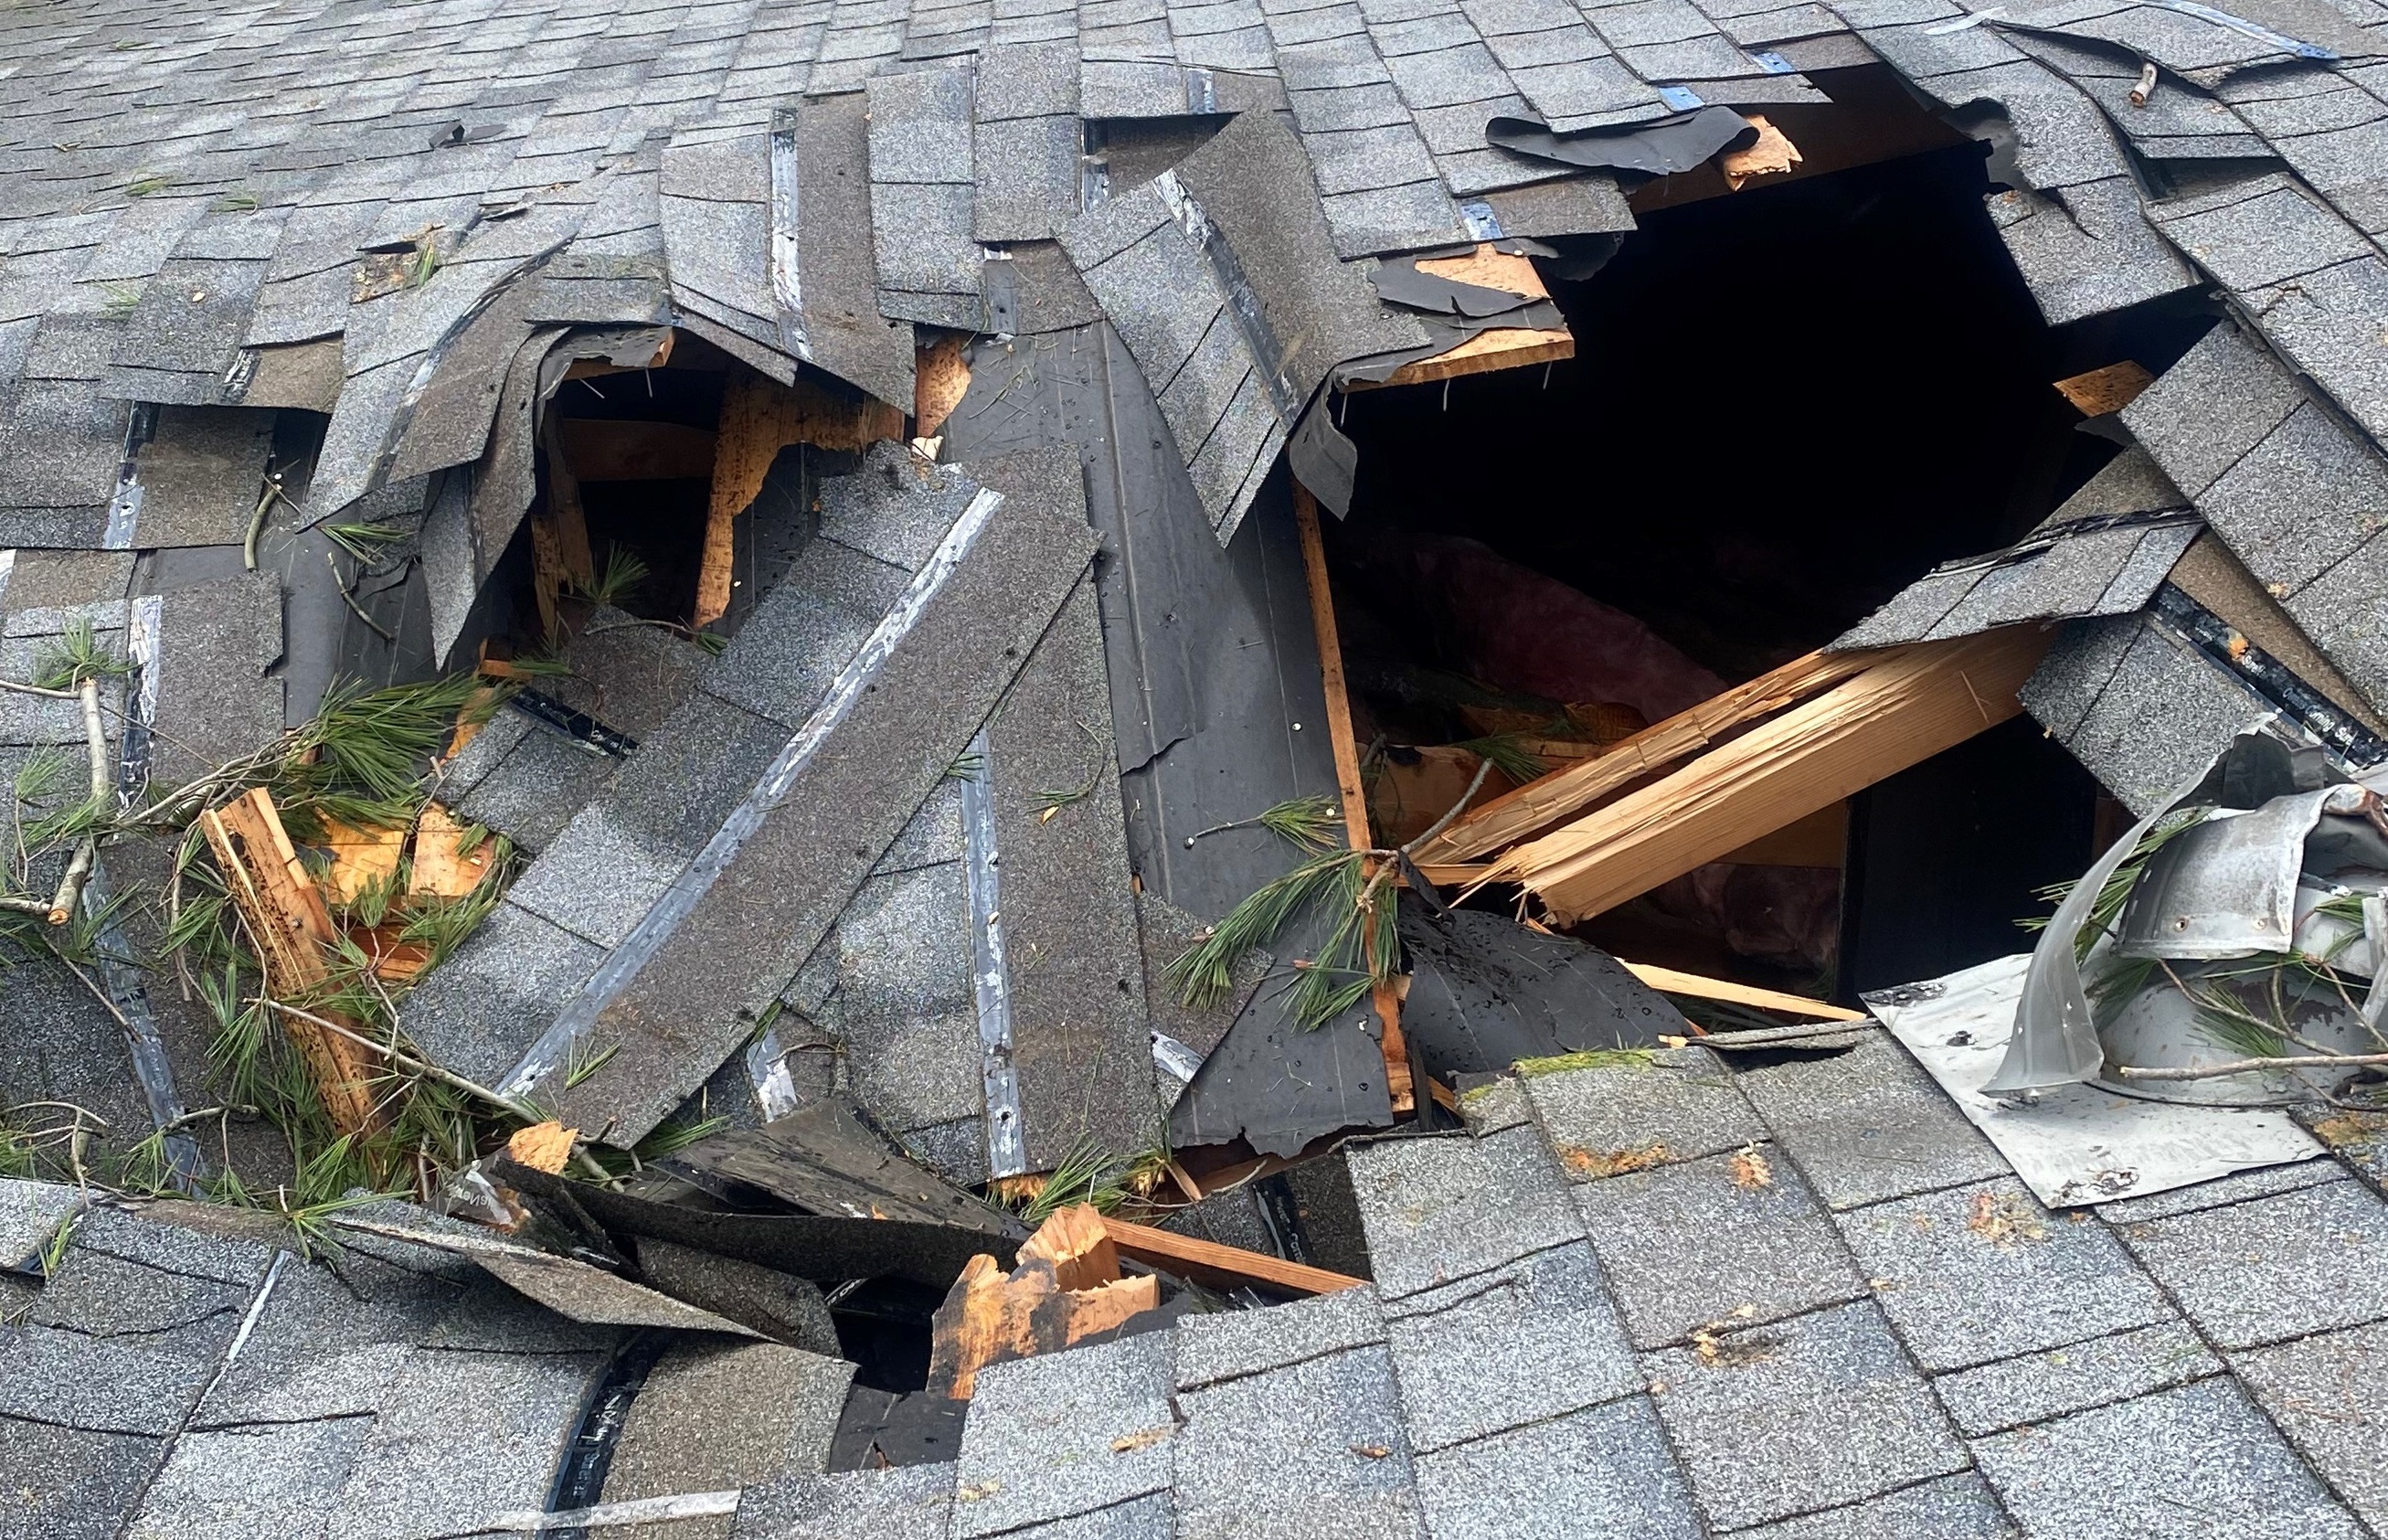 SERVPRO can provide emergency roof tarping and board-up services to help prevent additional damage from the elements and provide security to your property.